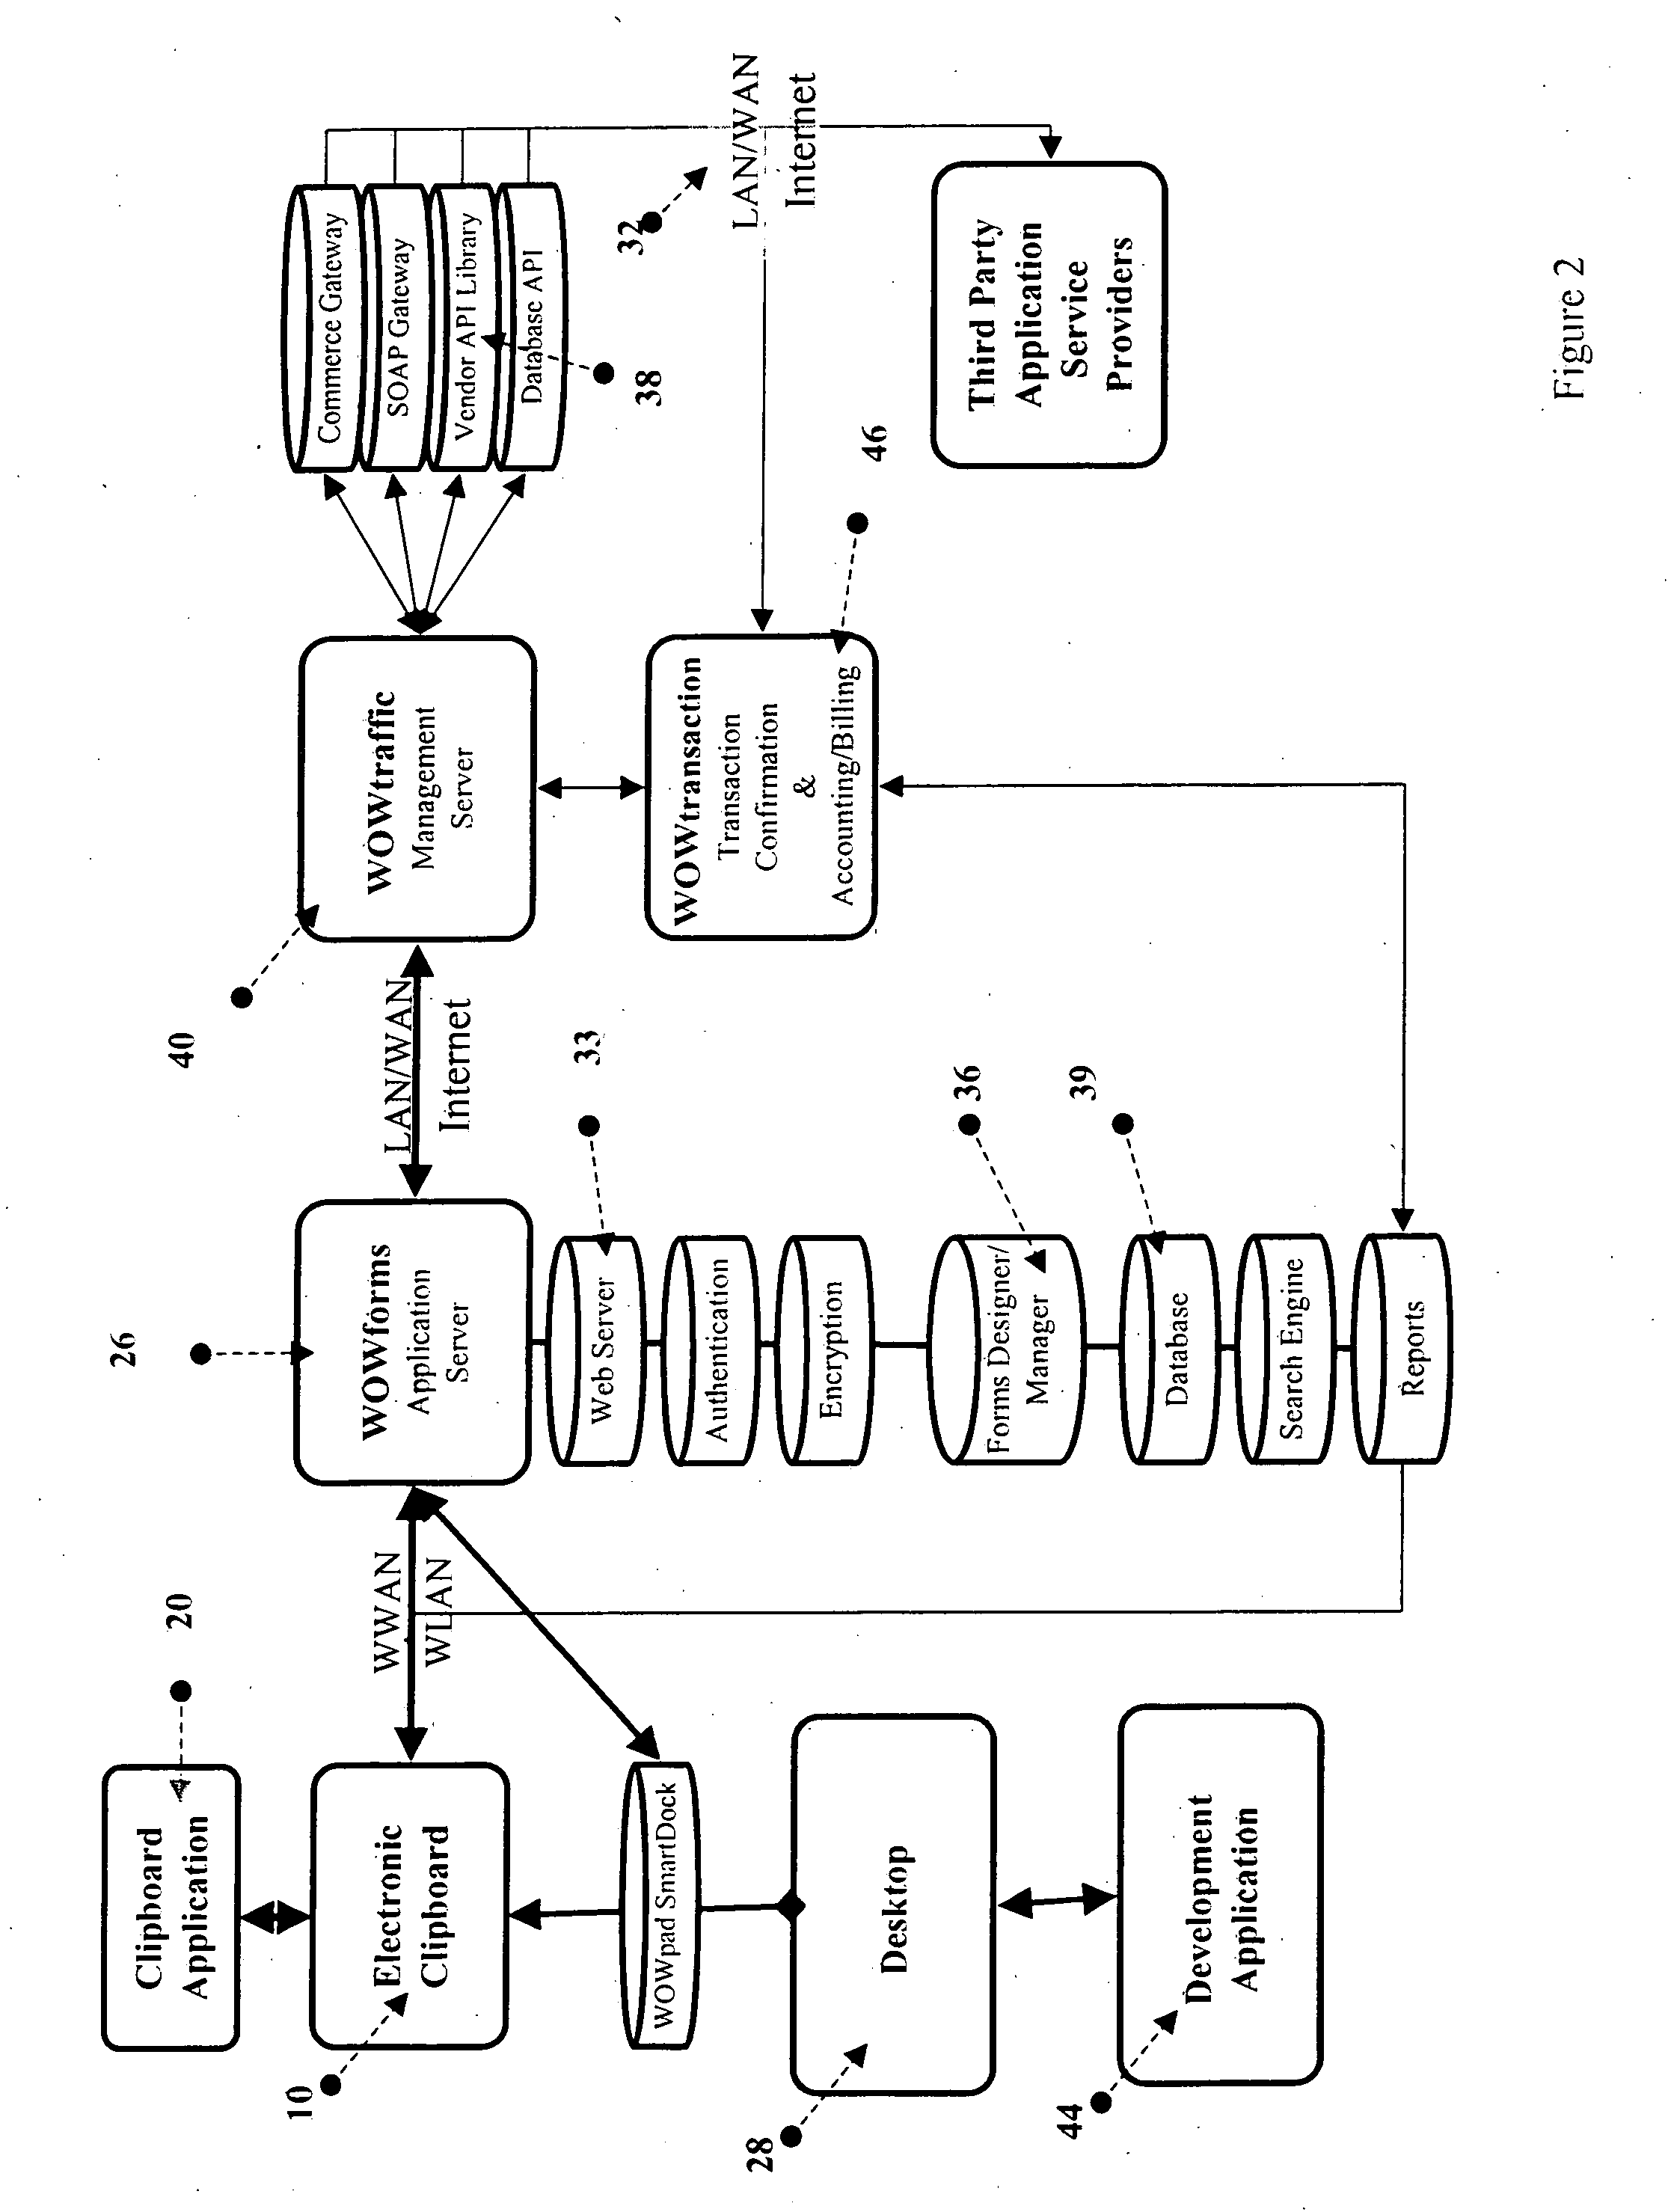 System, method and computer program for an integrated digital workflow for processing a paper form